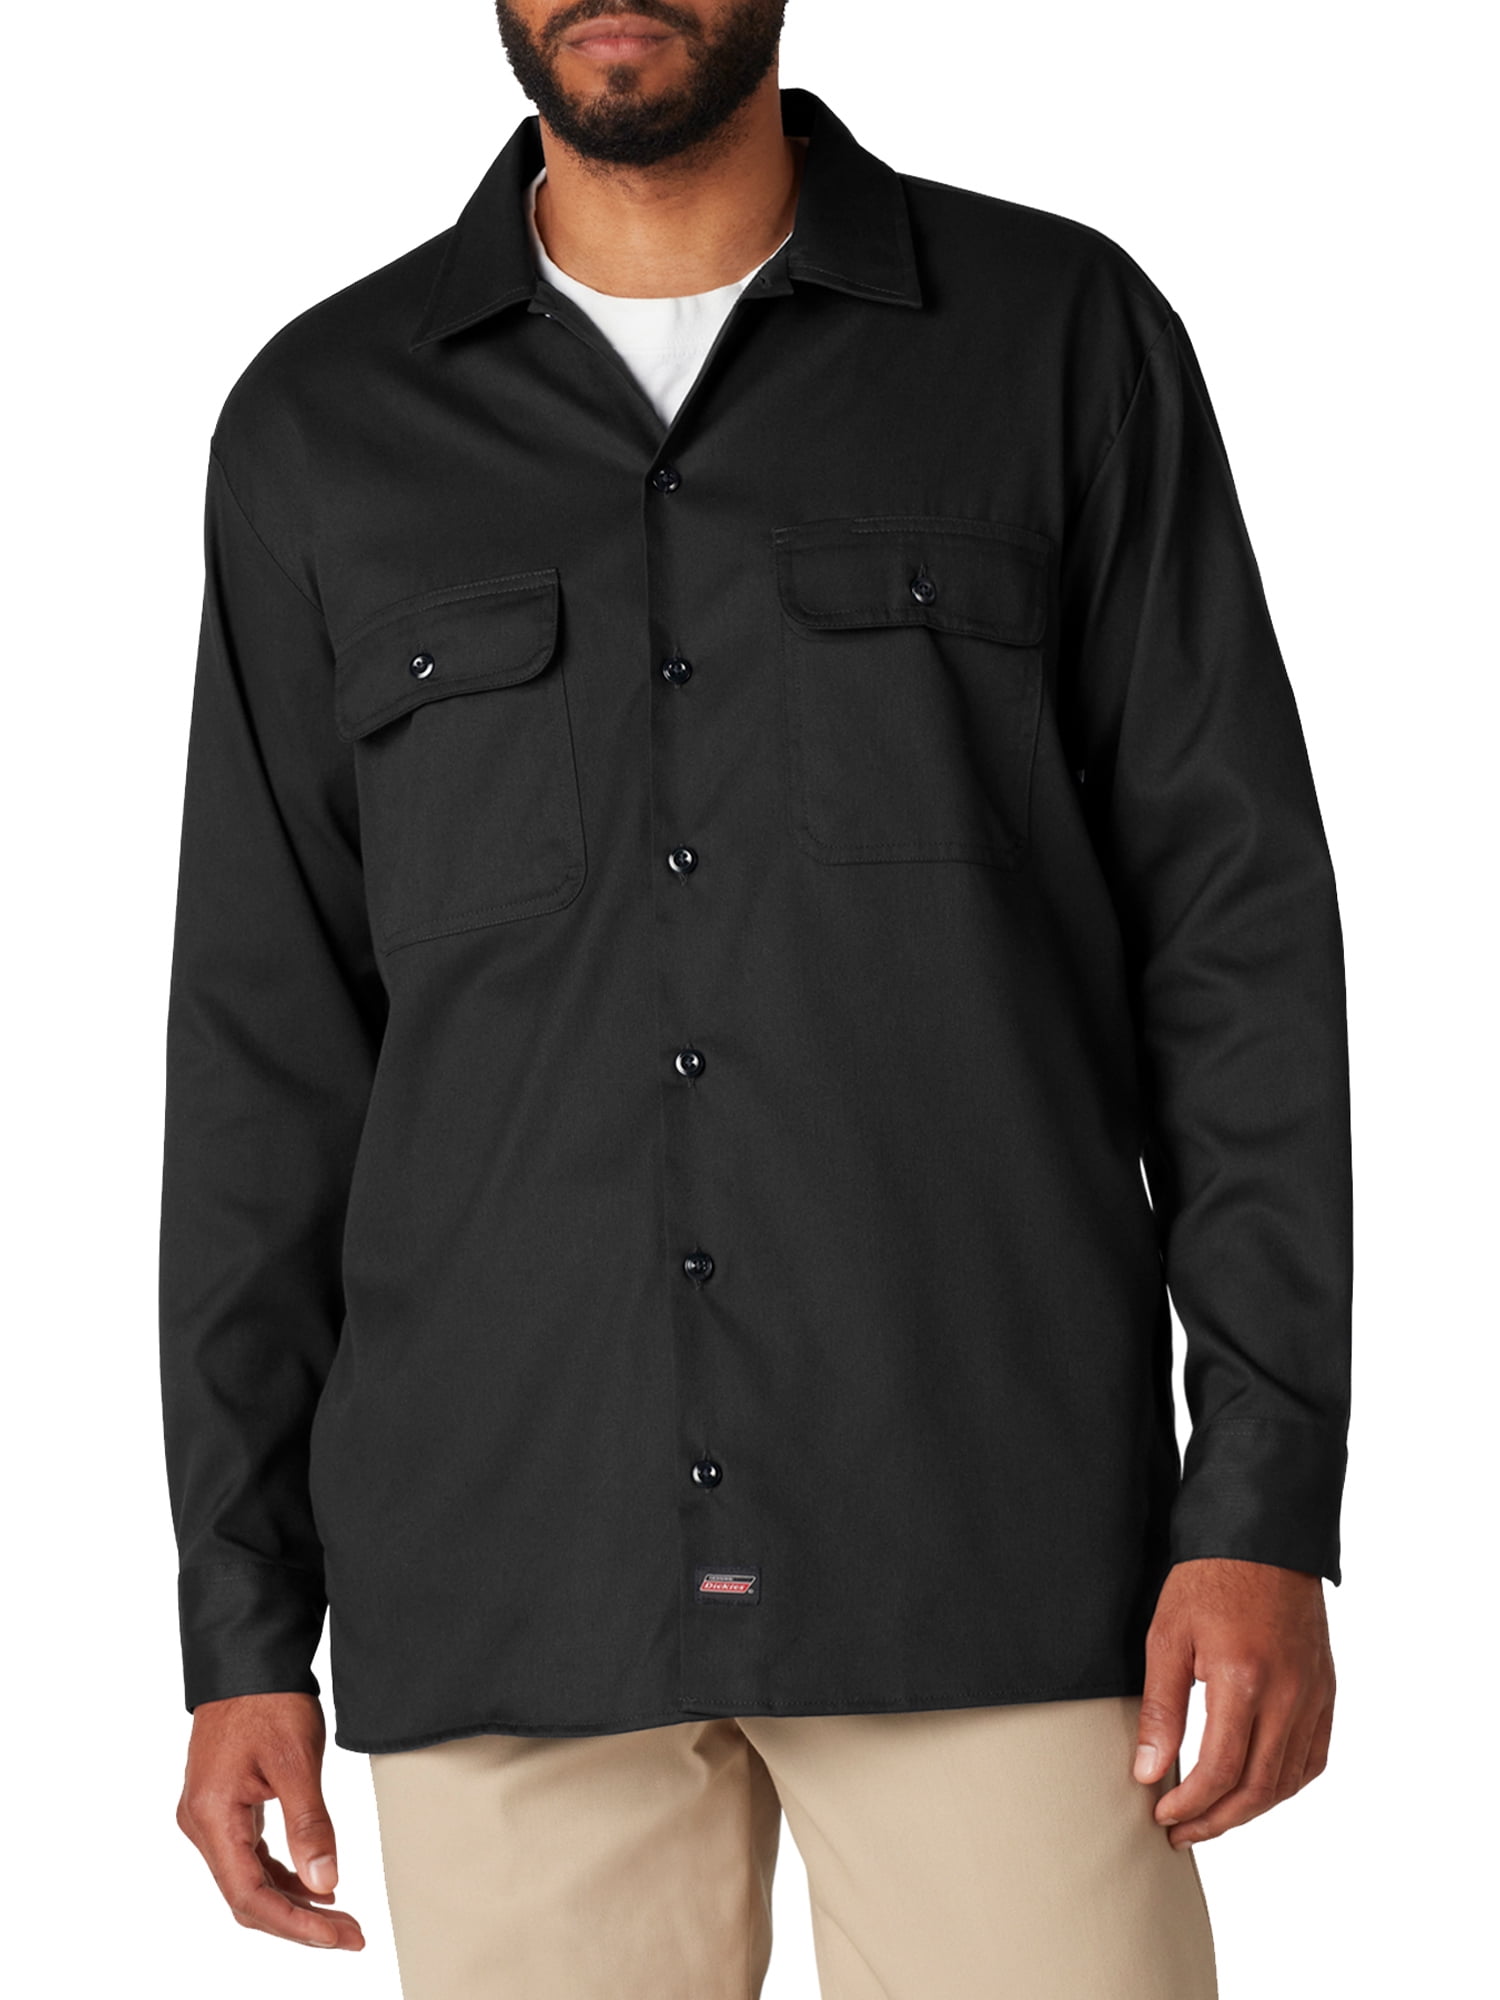 Genuine Dickies Men's FLEX Long Sleeve Work Shirt with Temp Control Cooling  